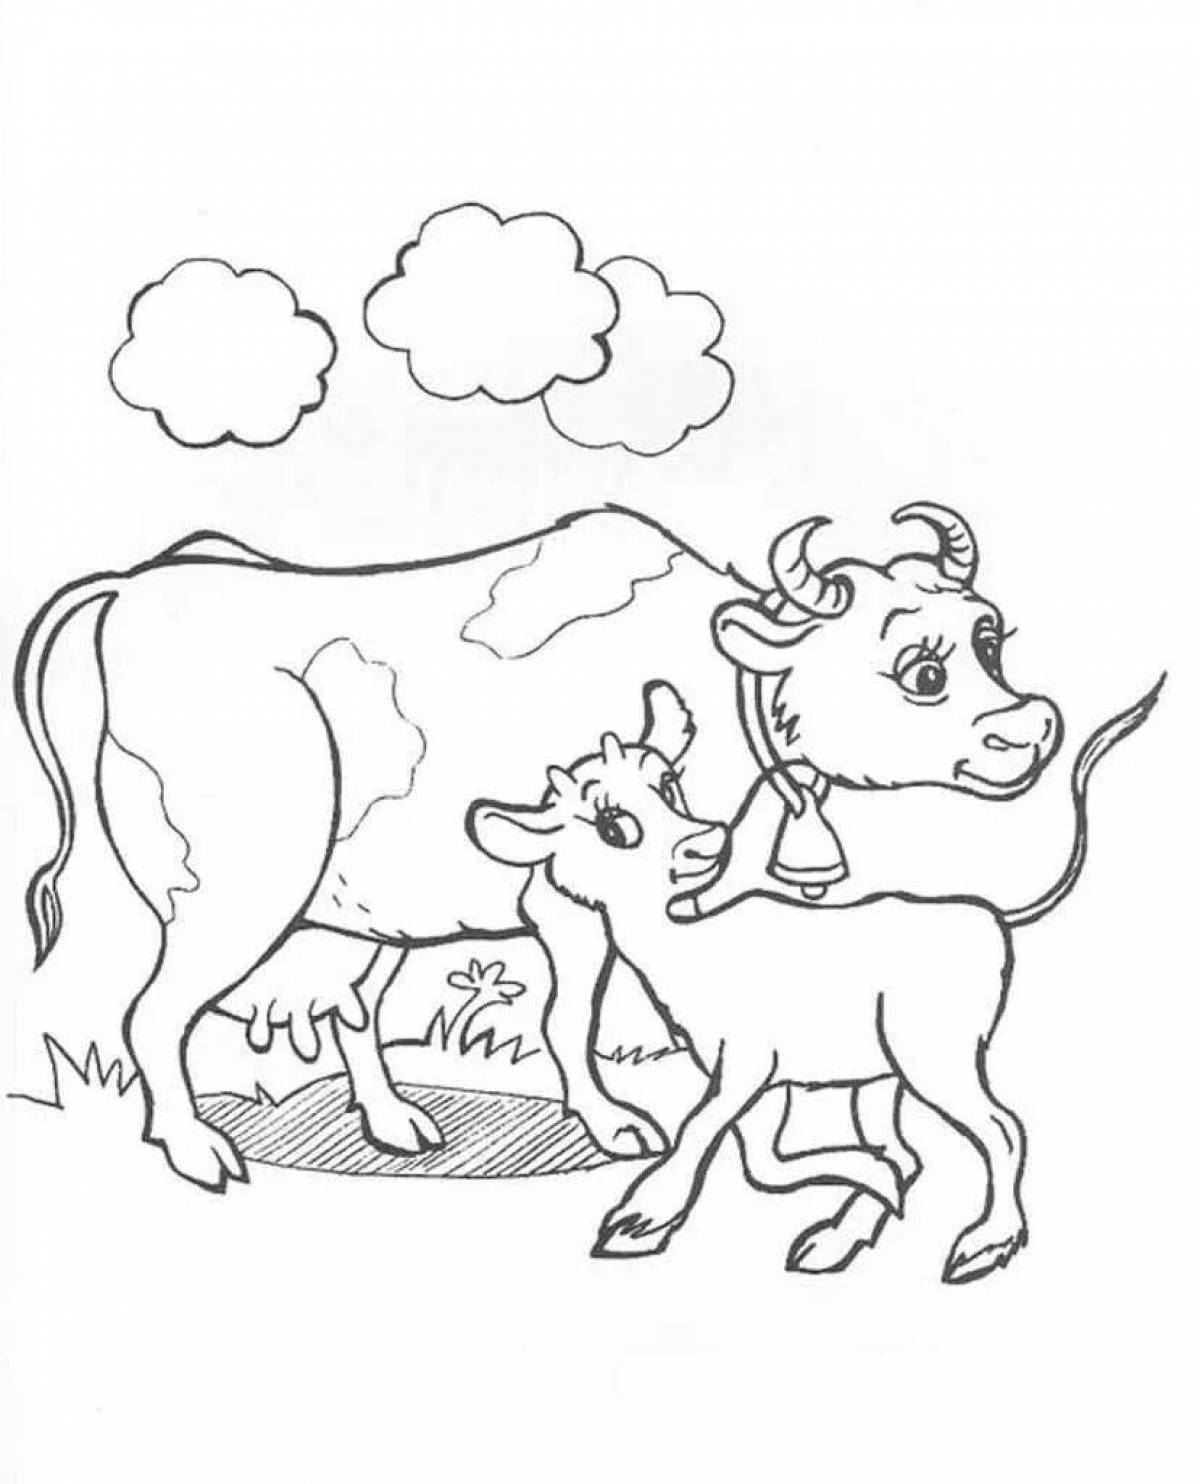 Coloring page exquisite cow and calf